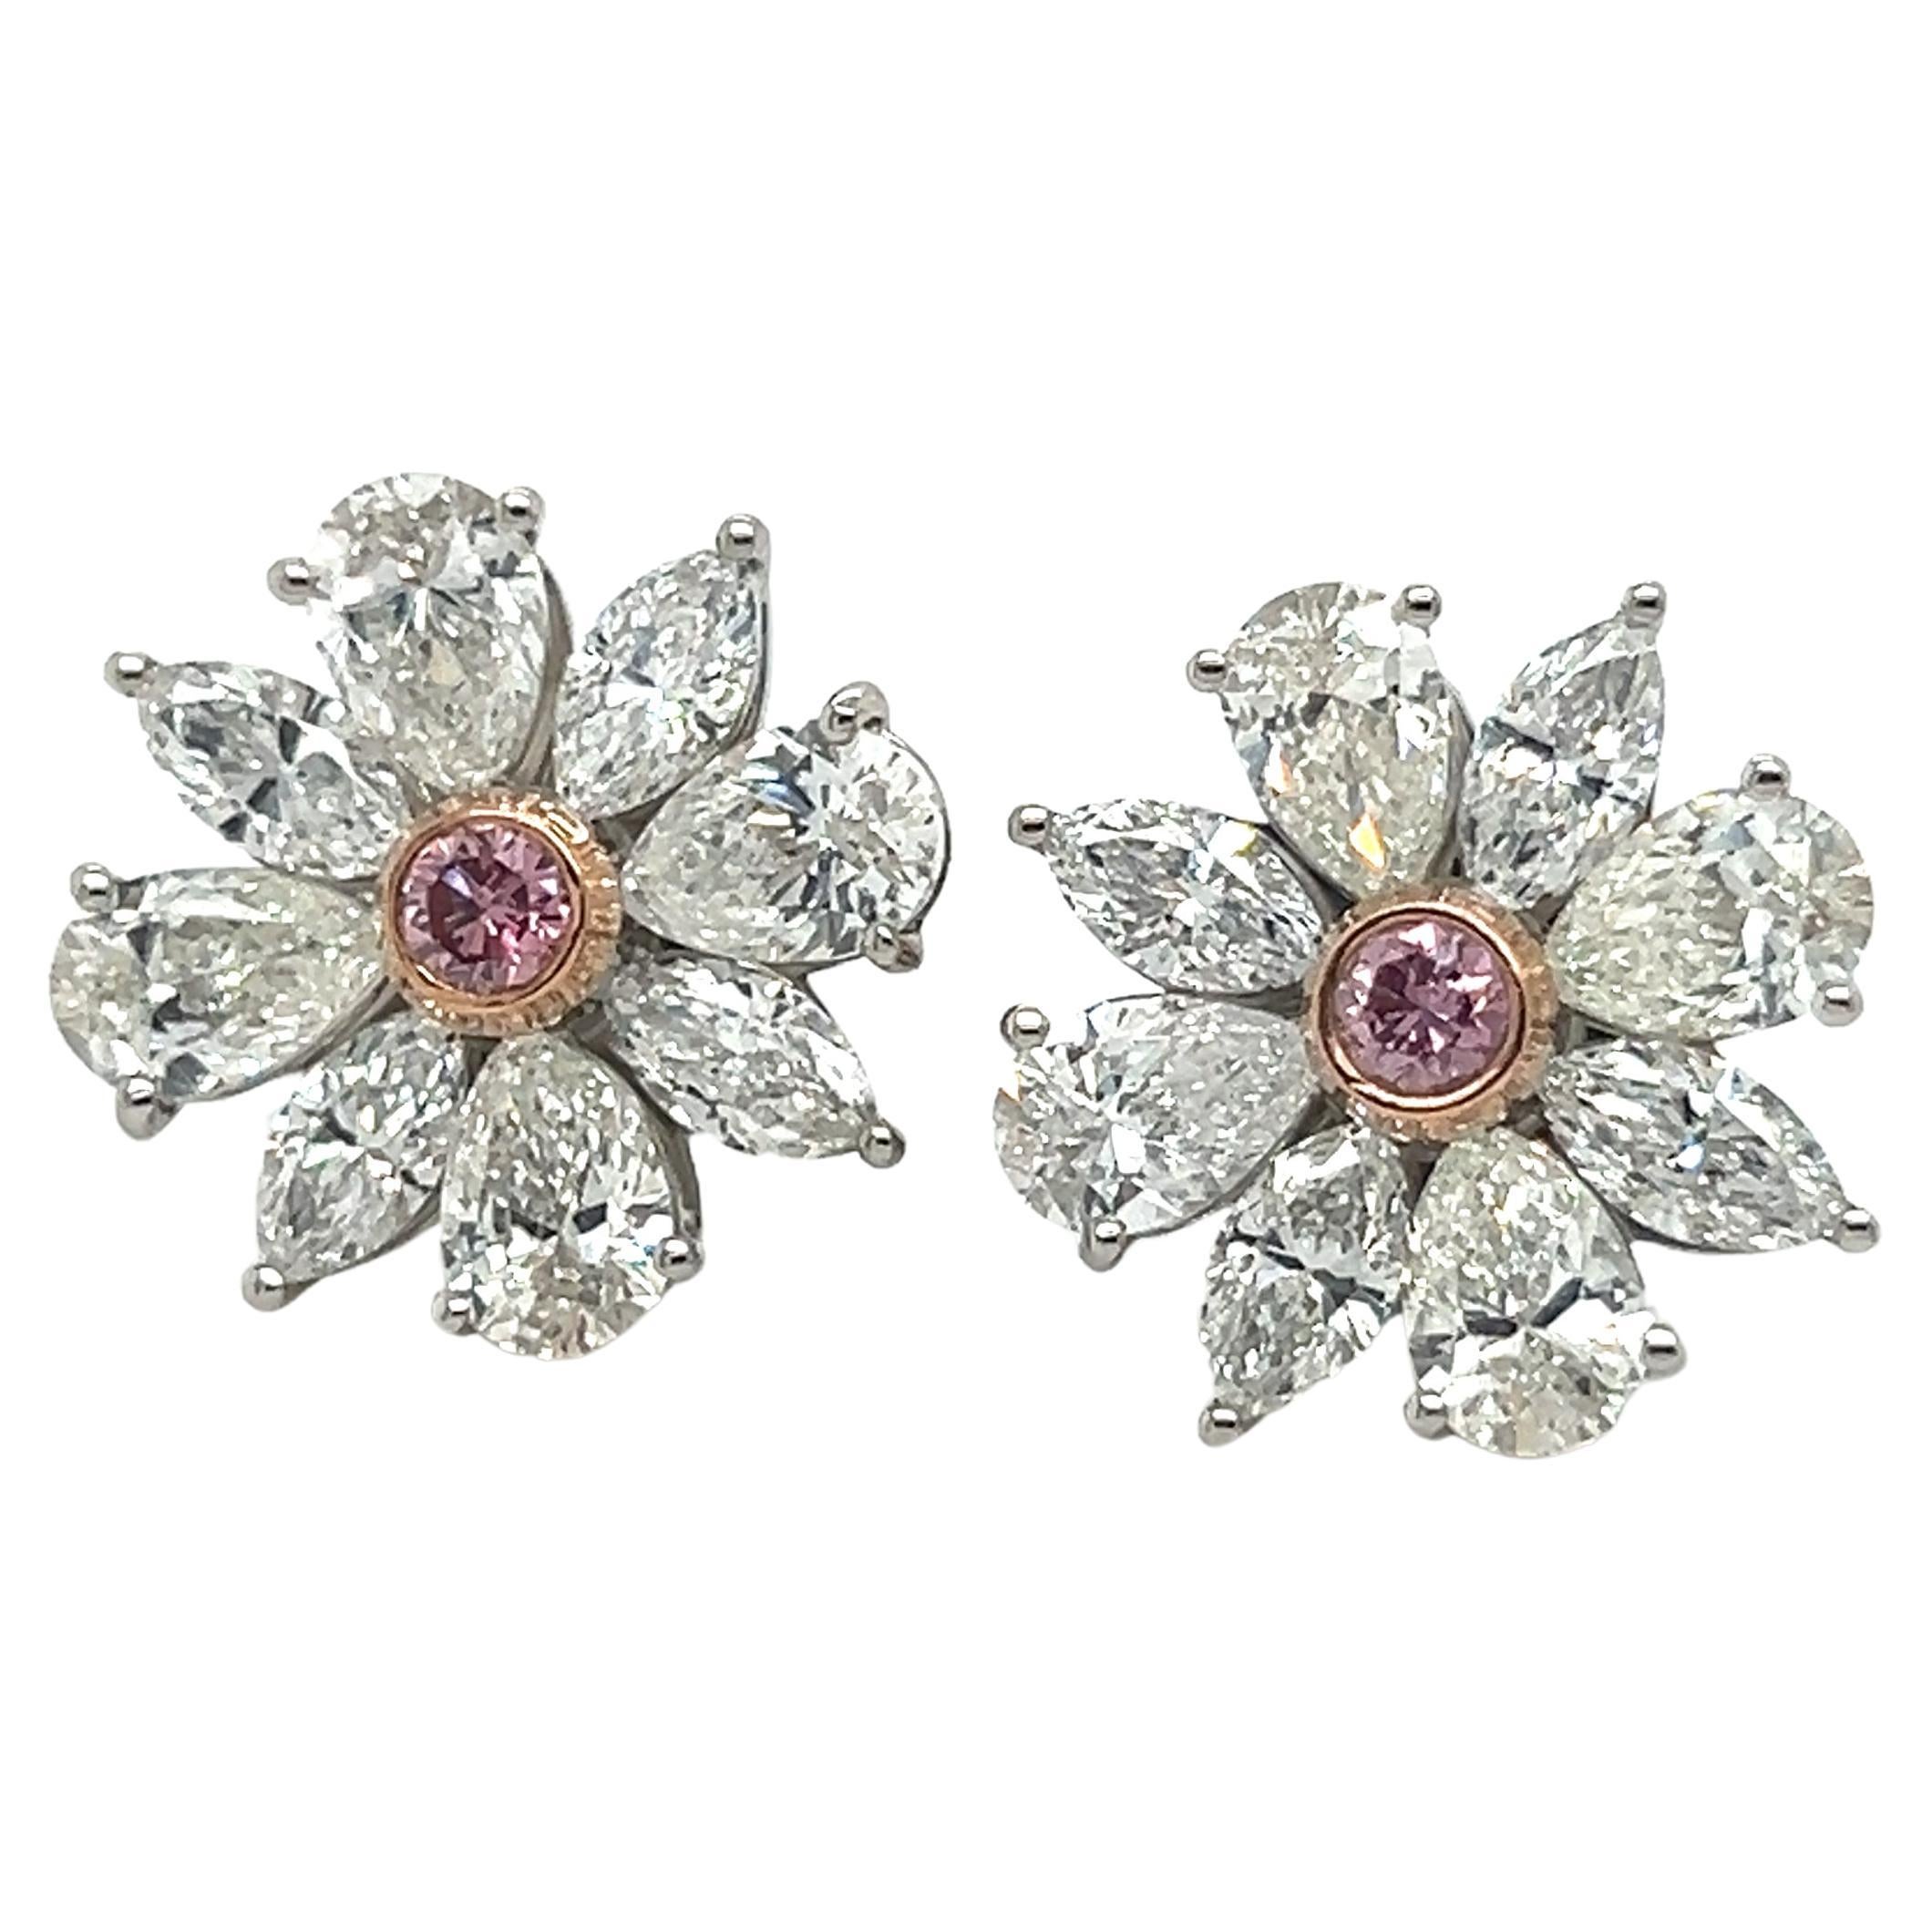 Hand crafted in house these gorgeous earrings highlight two GIA certified natural fancy intense pink diamonds. Each diamond weighs 0.09 carat and are the focal point of the pair. Hand crafted in platinum these earrings were hand built  for each